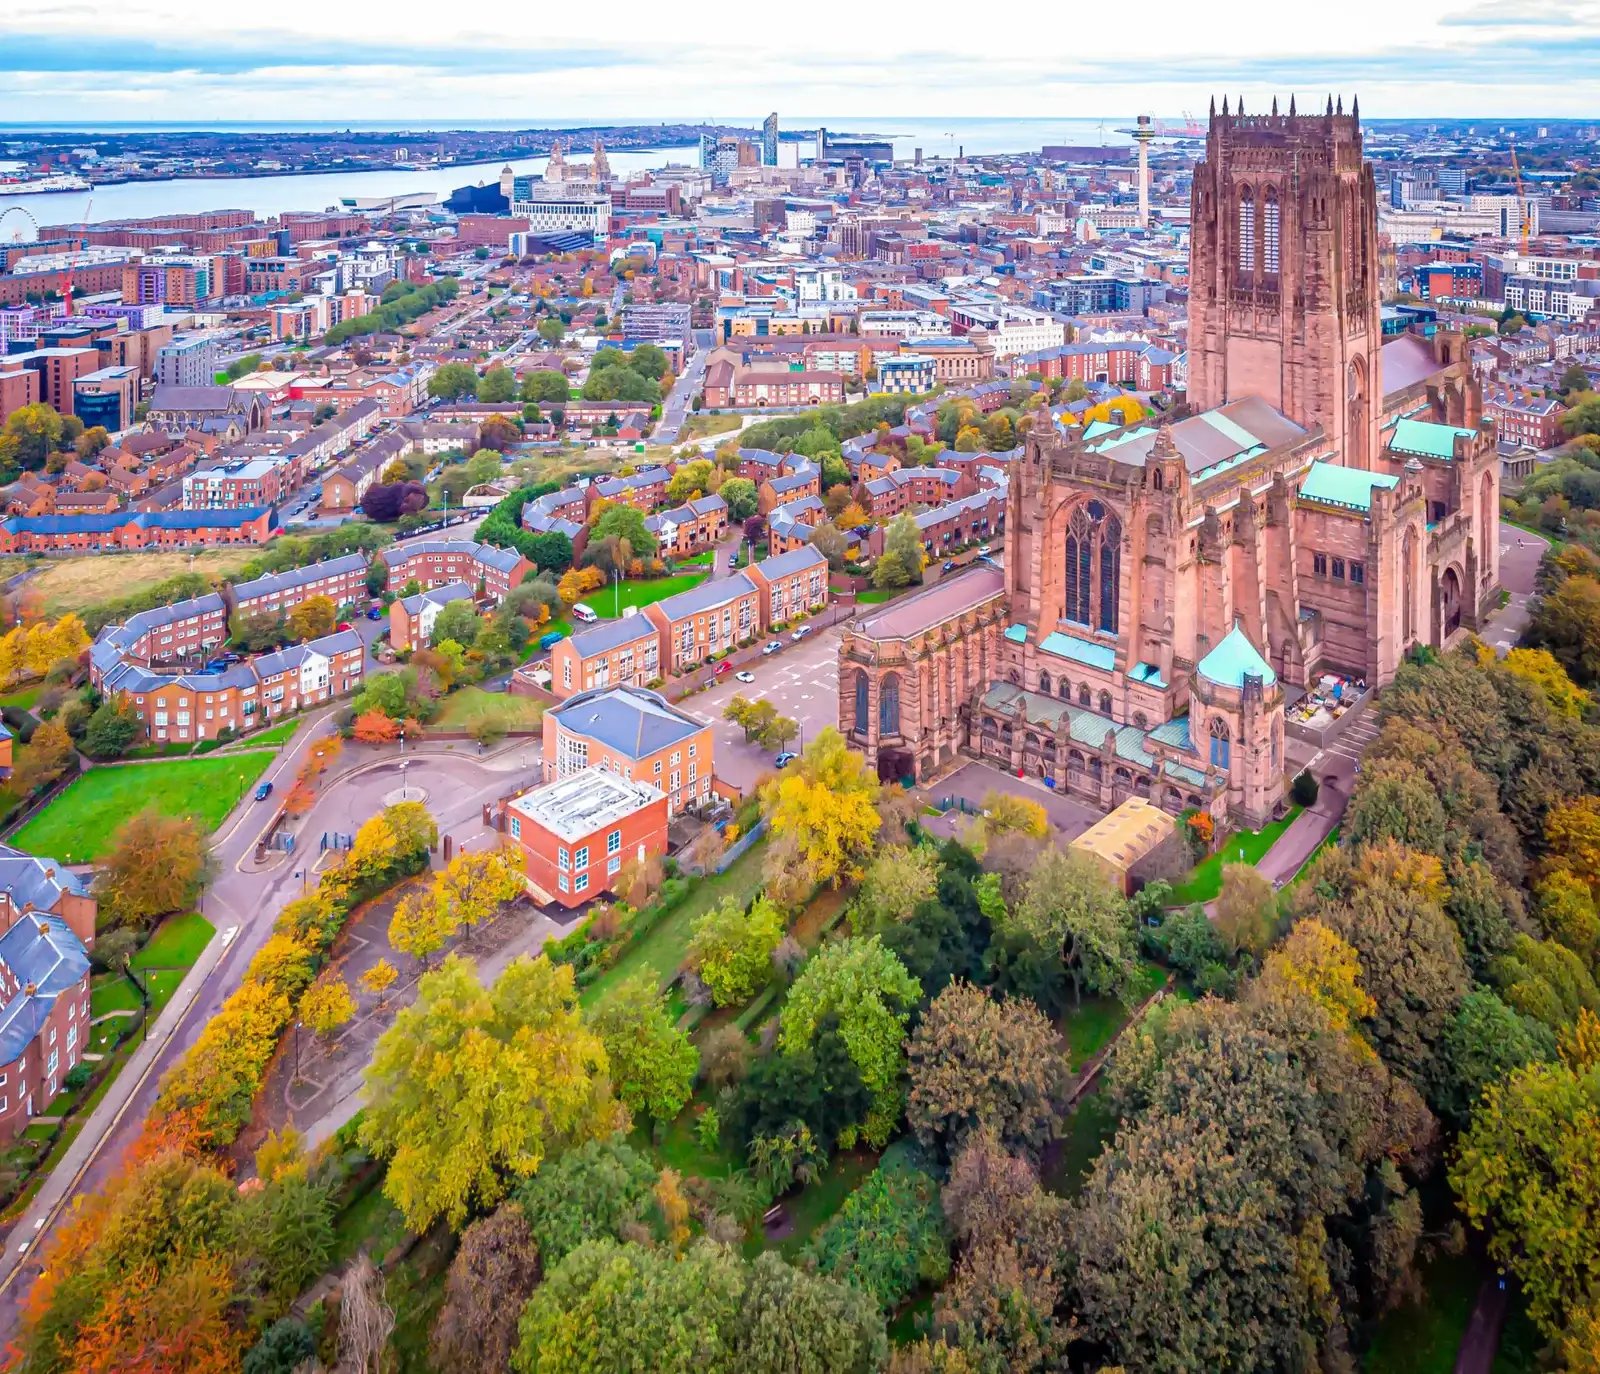 Aerial view of a historic cathedral surrounded by autumn trees in a cityscape.